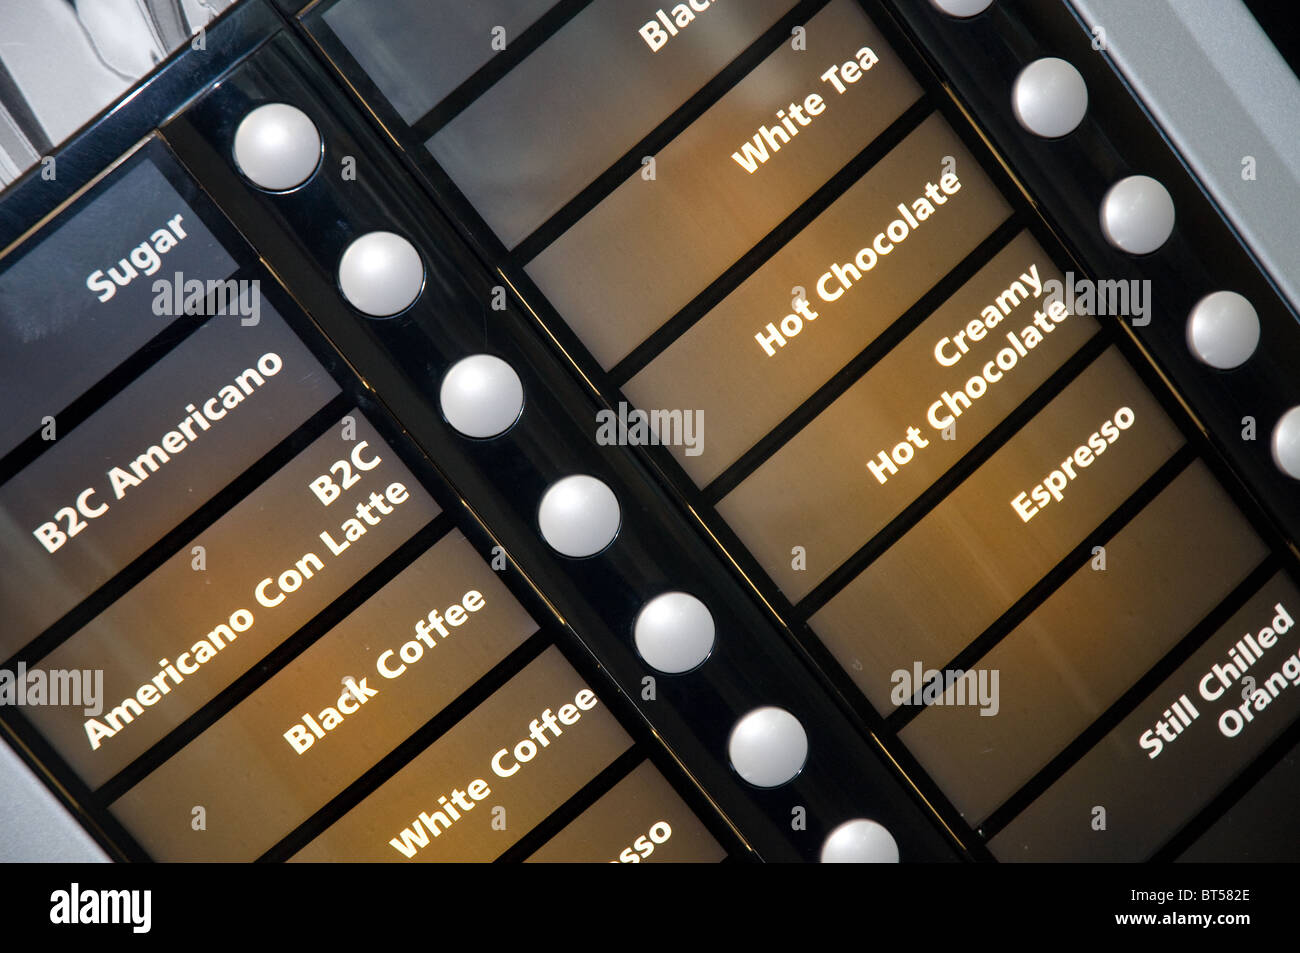 Vending machine panel showing buttons and drink choices Stock Photo - Alamy